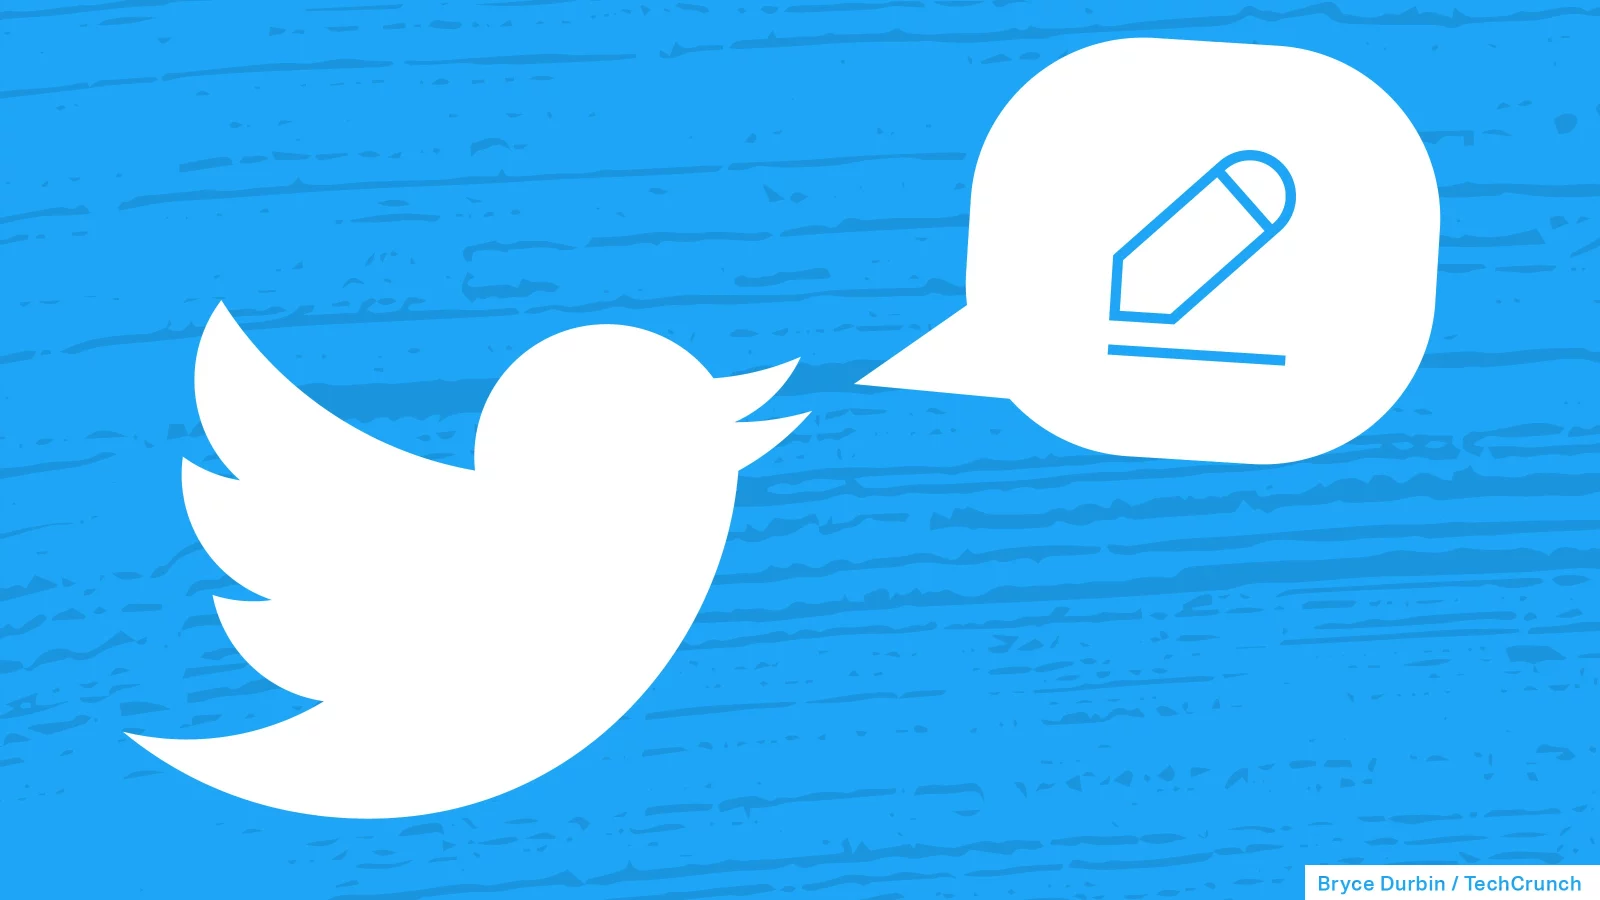 Twitter Blue users would soon be able to edit their tweets